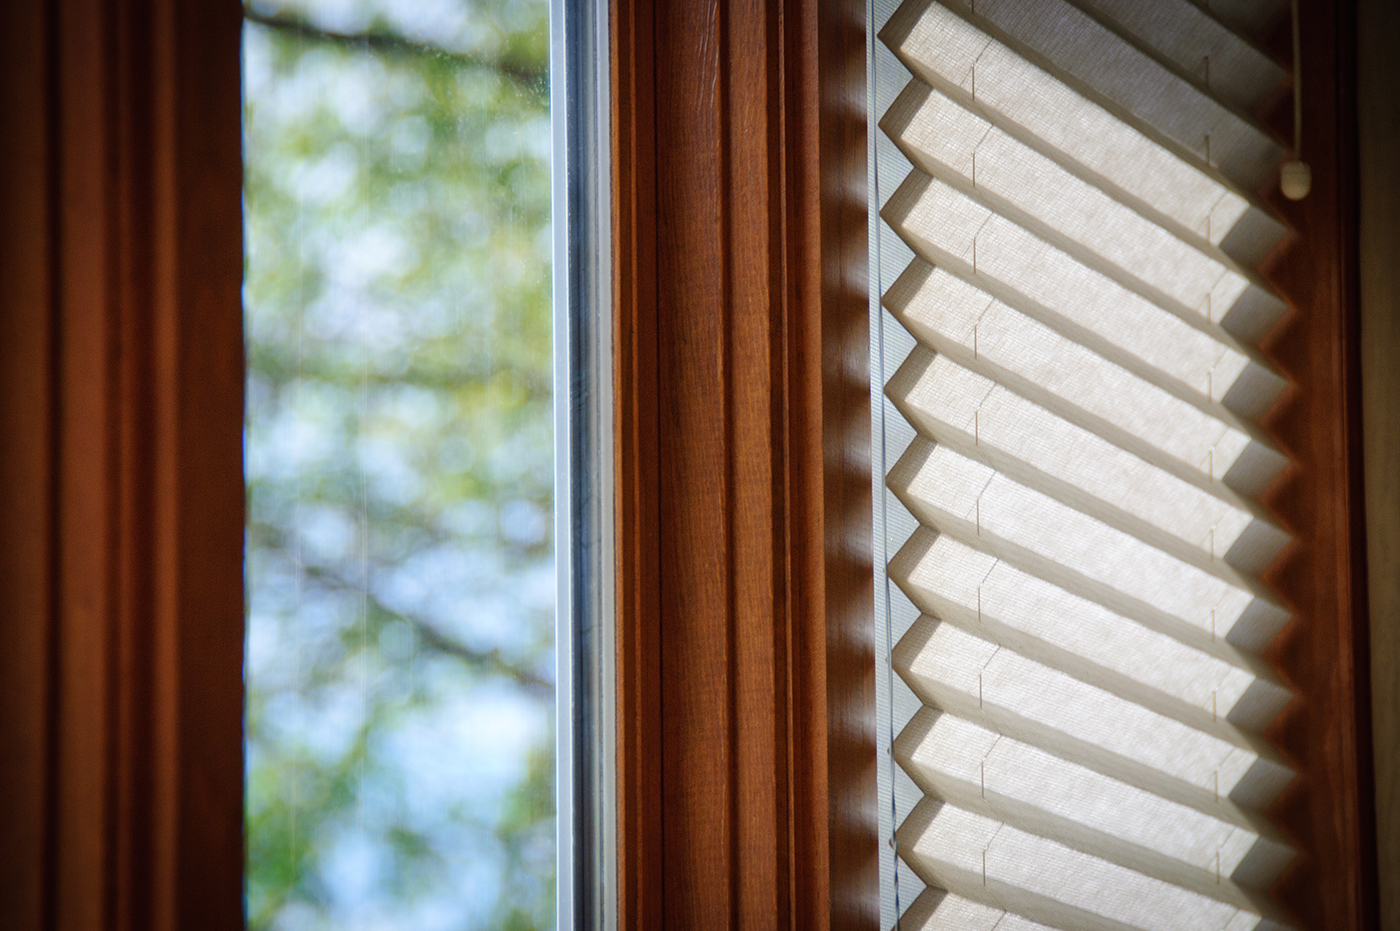 Some cream-colored window shades on a window.